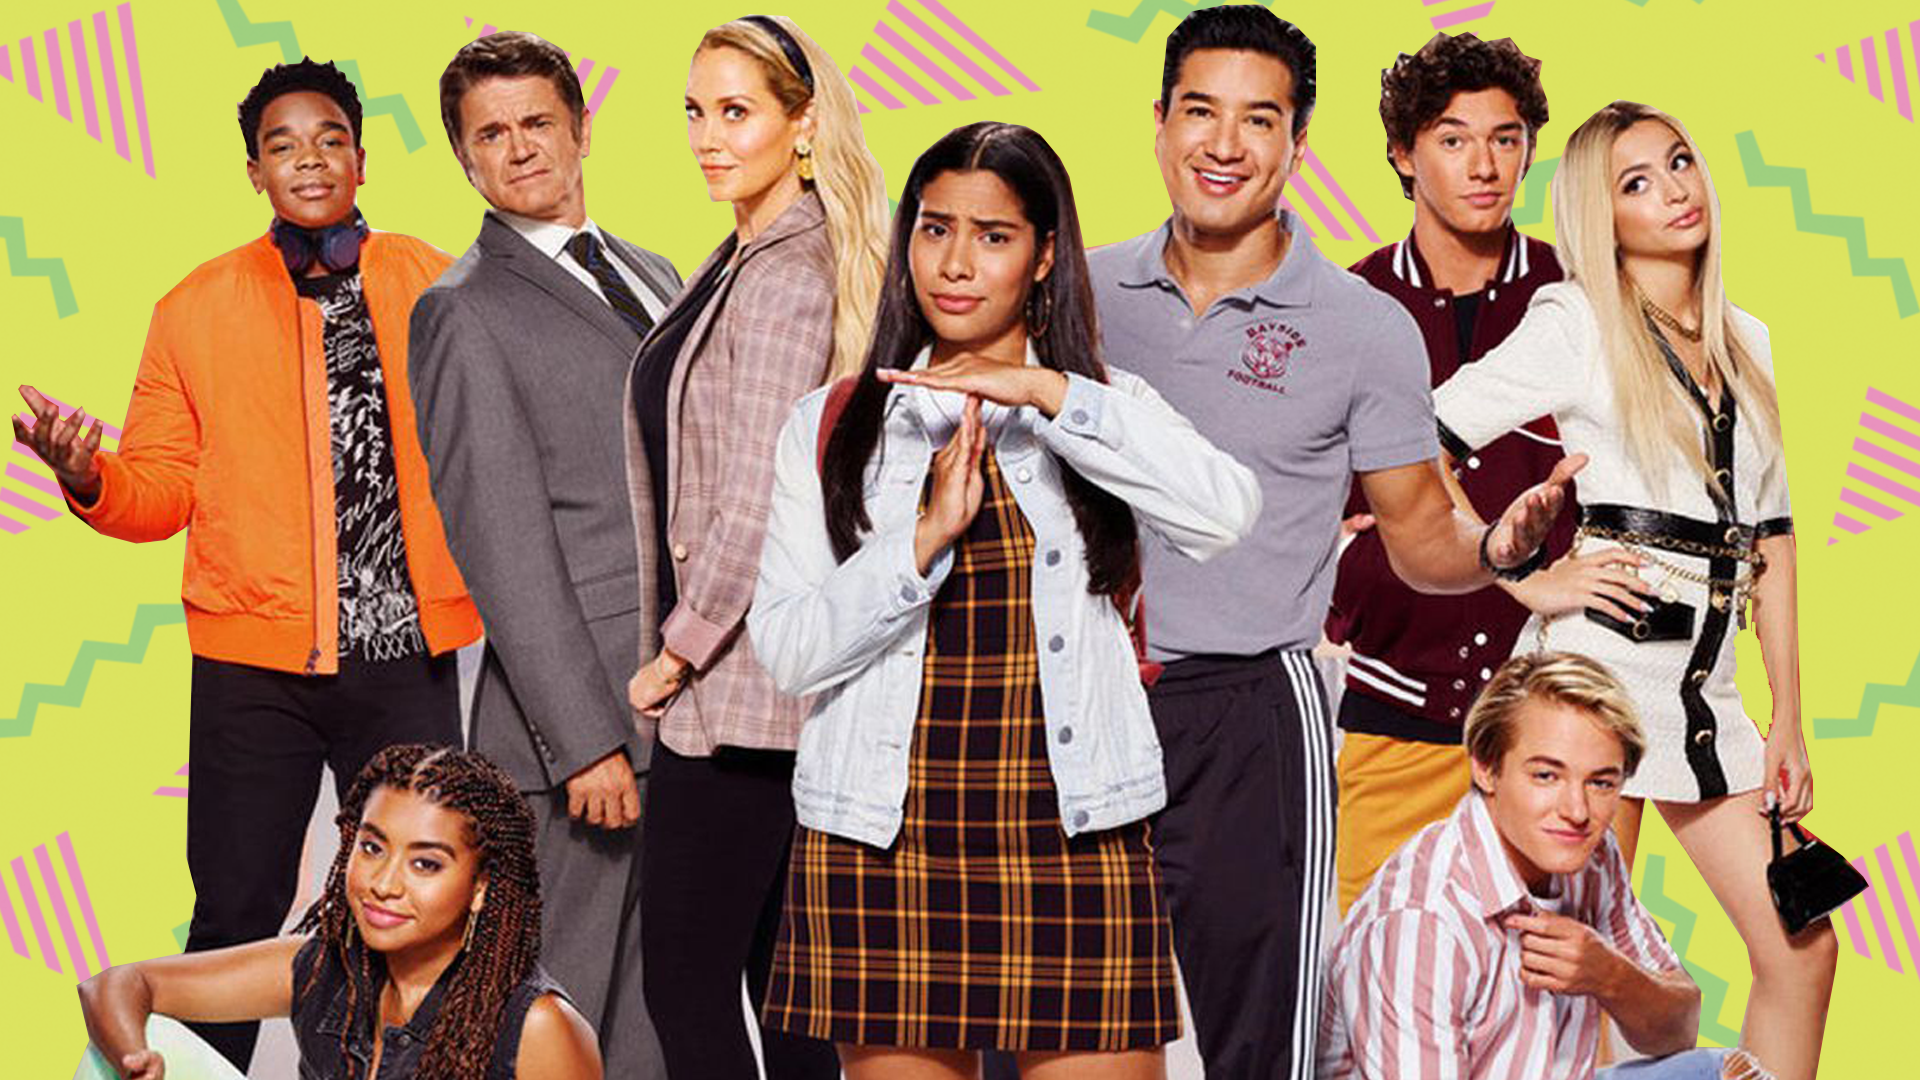 Saved by the Bell reboot cast